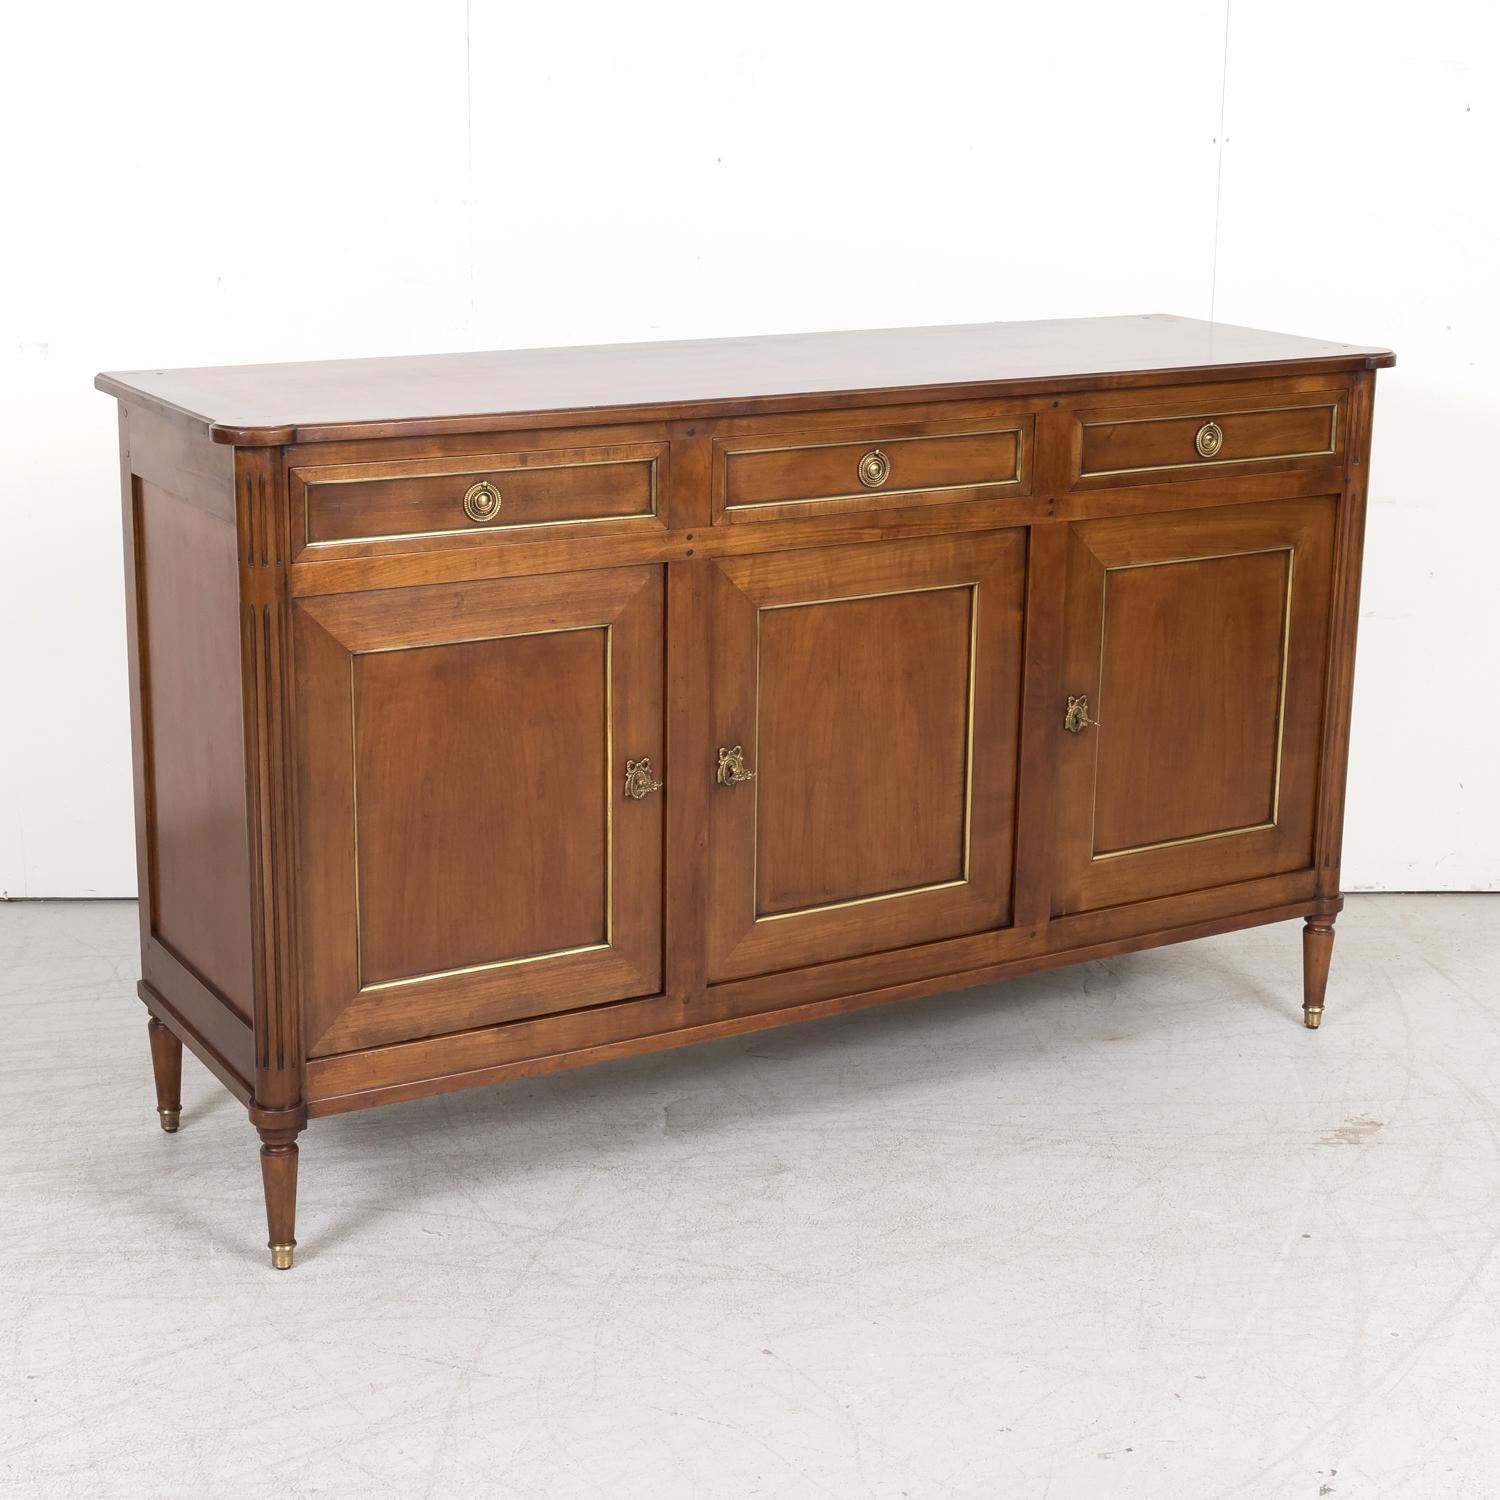 Antique French Louis XVI Style Enfilade Buffet in Solid Cherry with Brass Trim 1